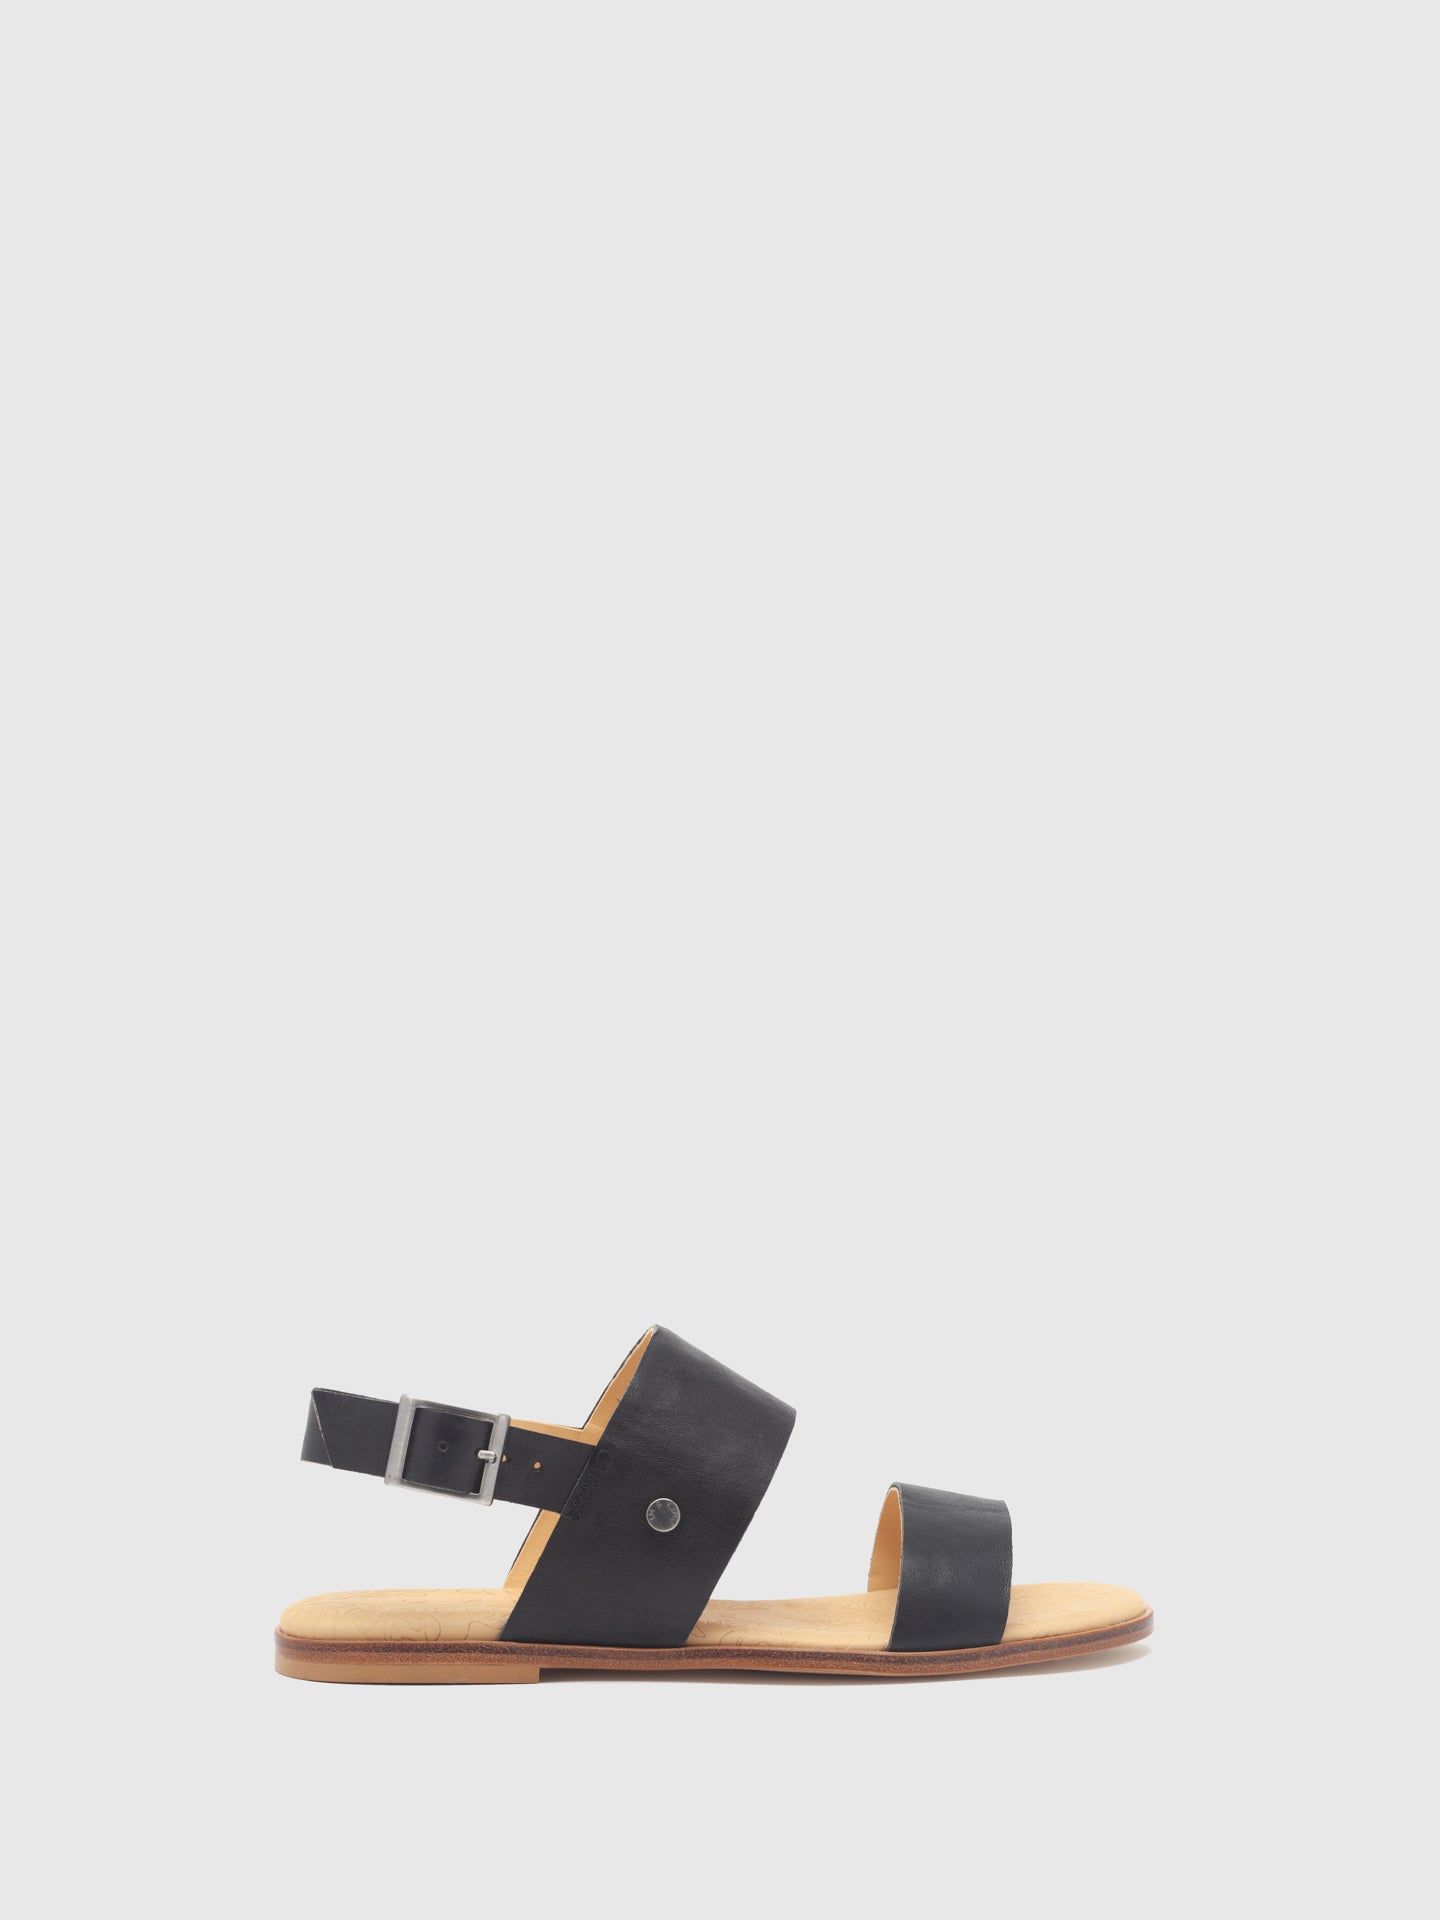 Only2Me Black Leather Buckle Sandals